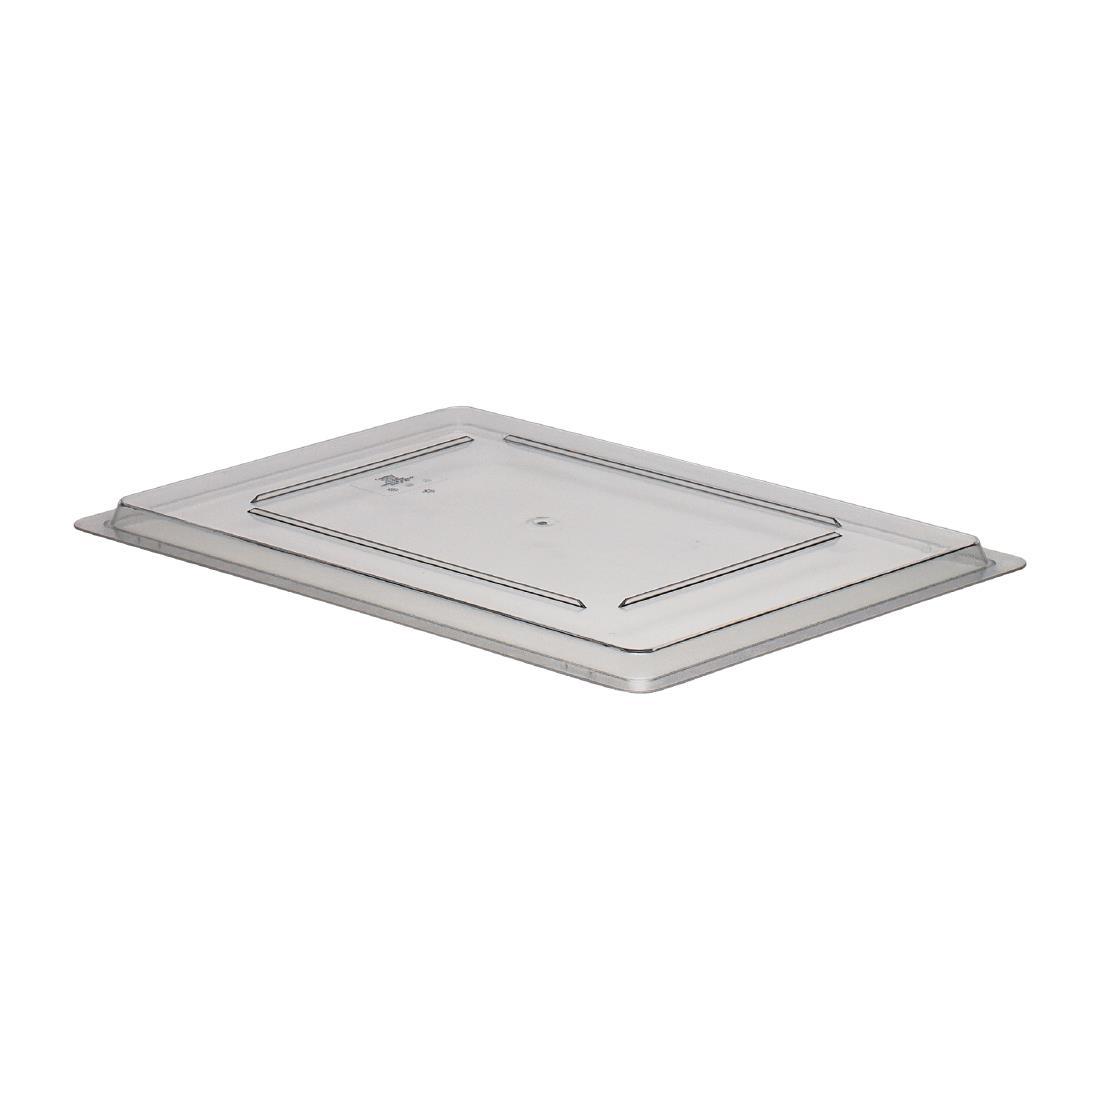 Cambro Polycarbonate Flat Lid for Storage Boxes - FE736  - 1